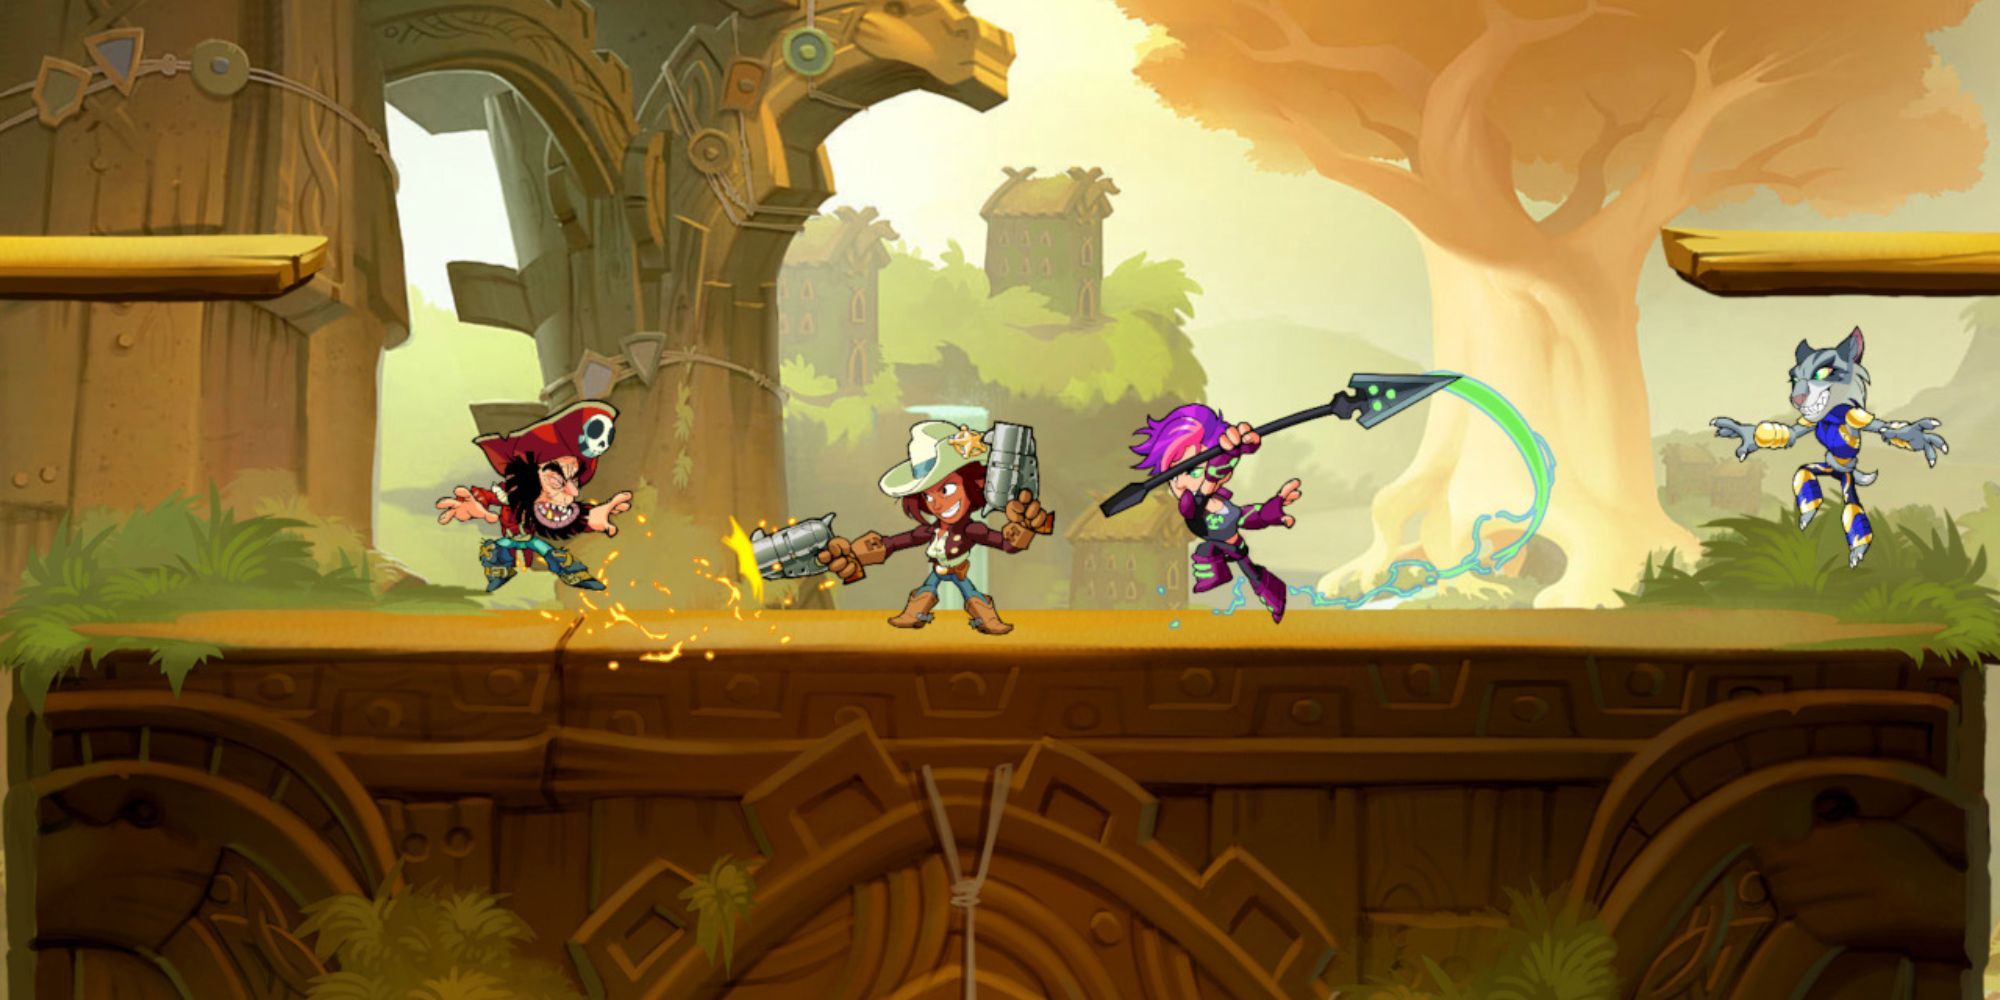 Brawlhalla: Cassidy shoots at Thatch while Asuri gets ready to attack Ada